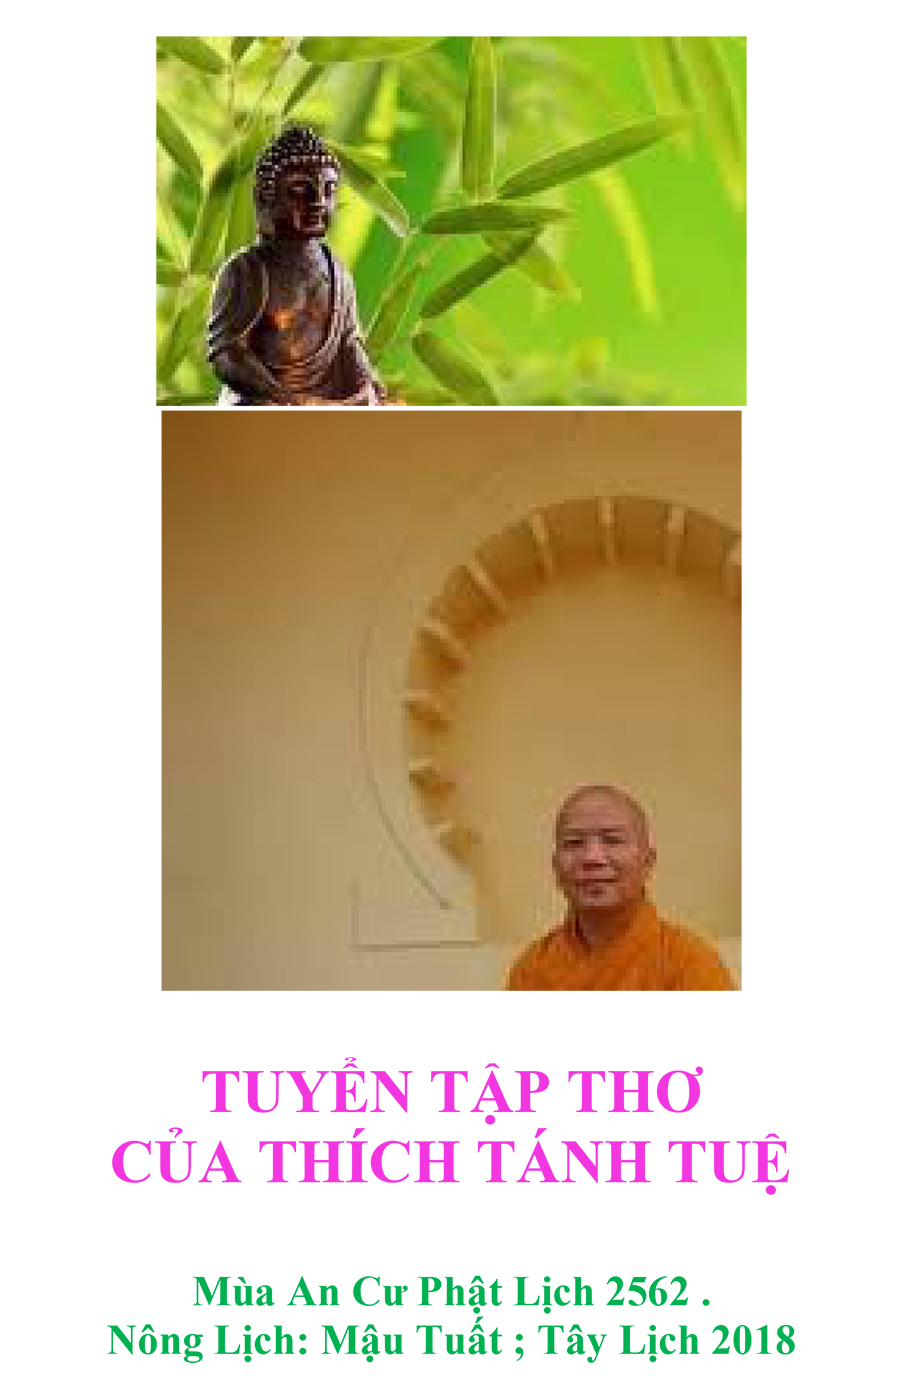 Tuyen Tap Tho_Thich Tanh Tue